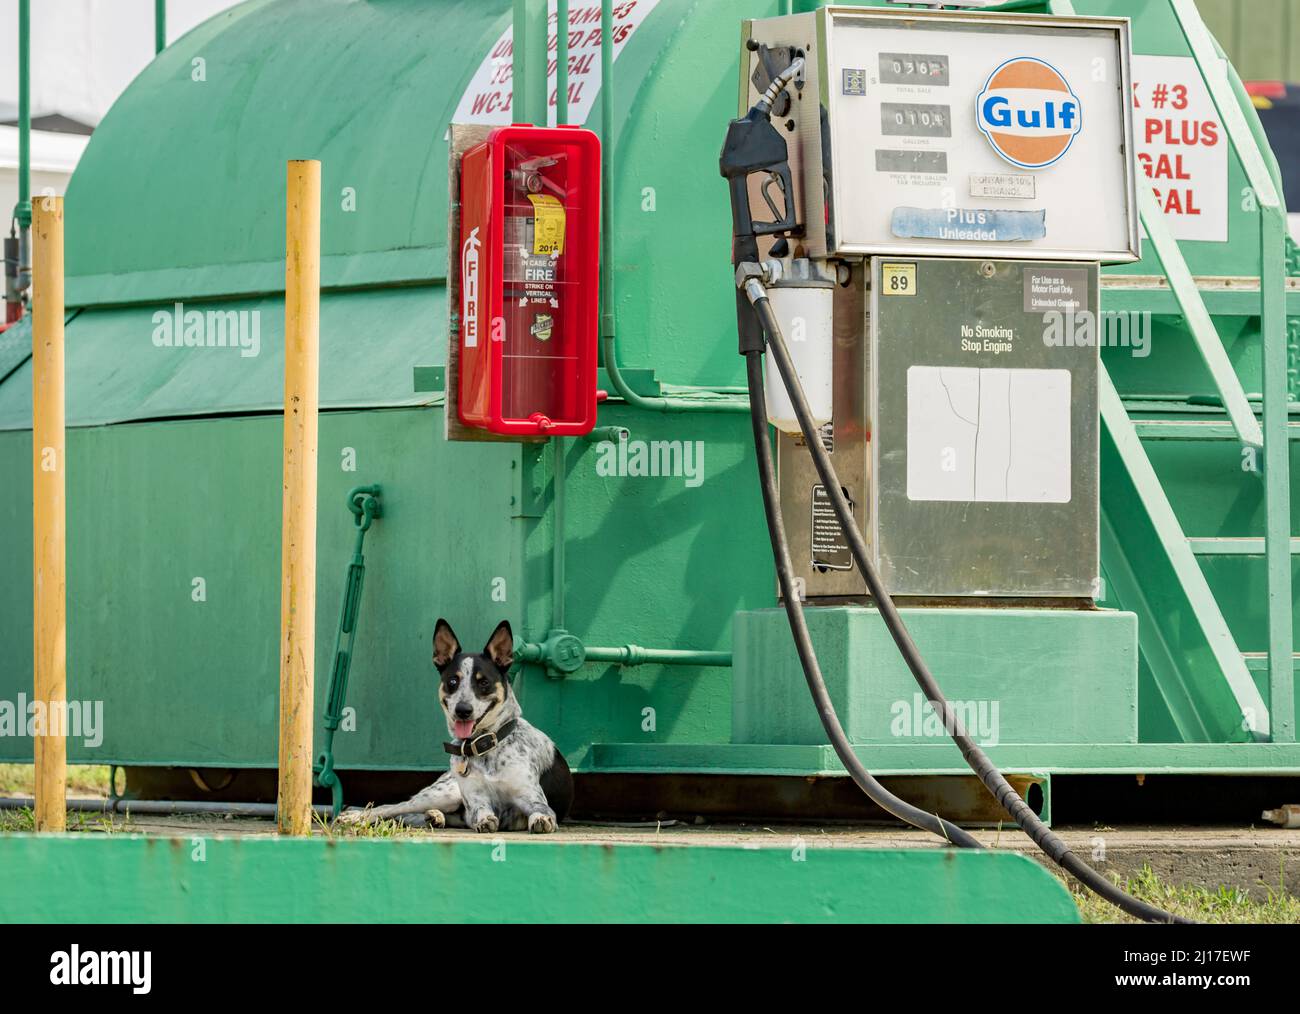 A dog sitting next to a fuel pump and fuel storage tank Stock Photo